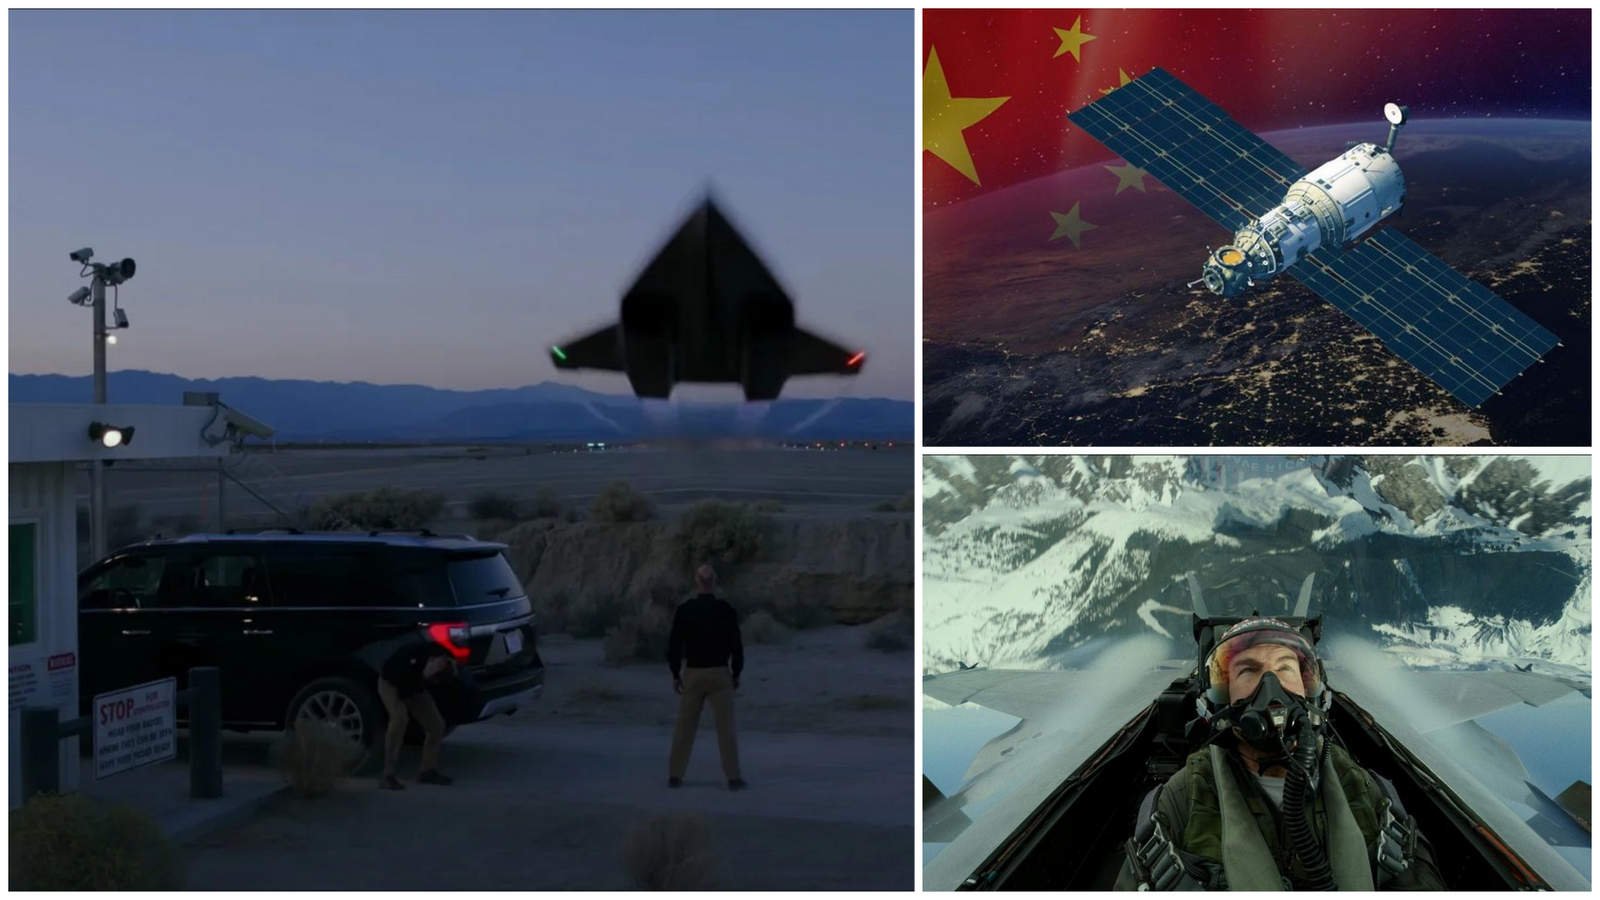 The hypersonic jet piloted by Tom Cruise in the upcoming Top Gun movie looked so real and scary that China actually moved its spy satellite to a different route to photograph it.